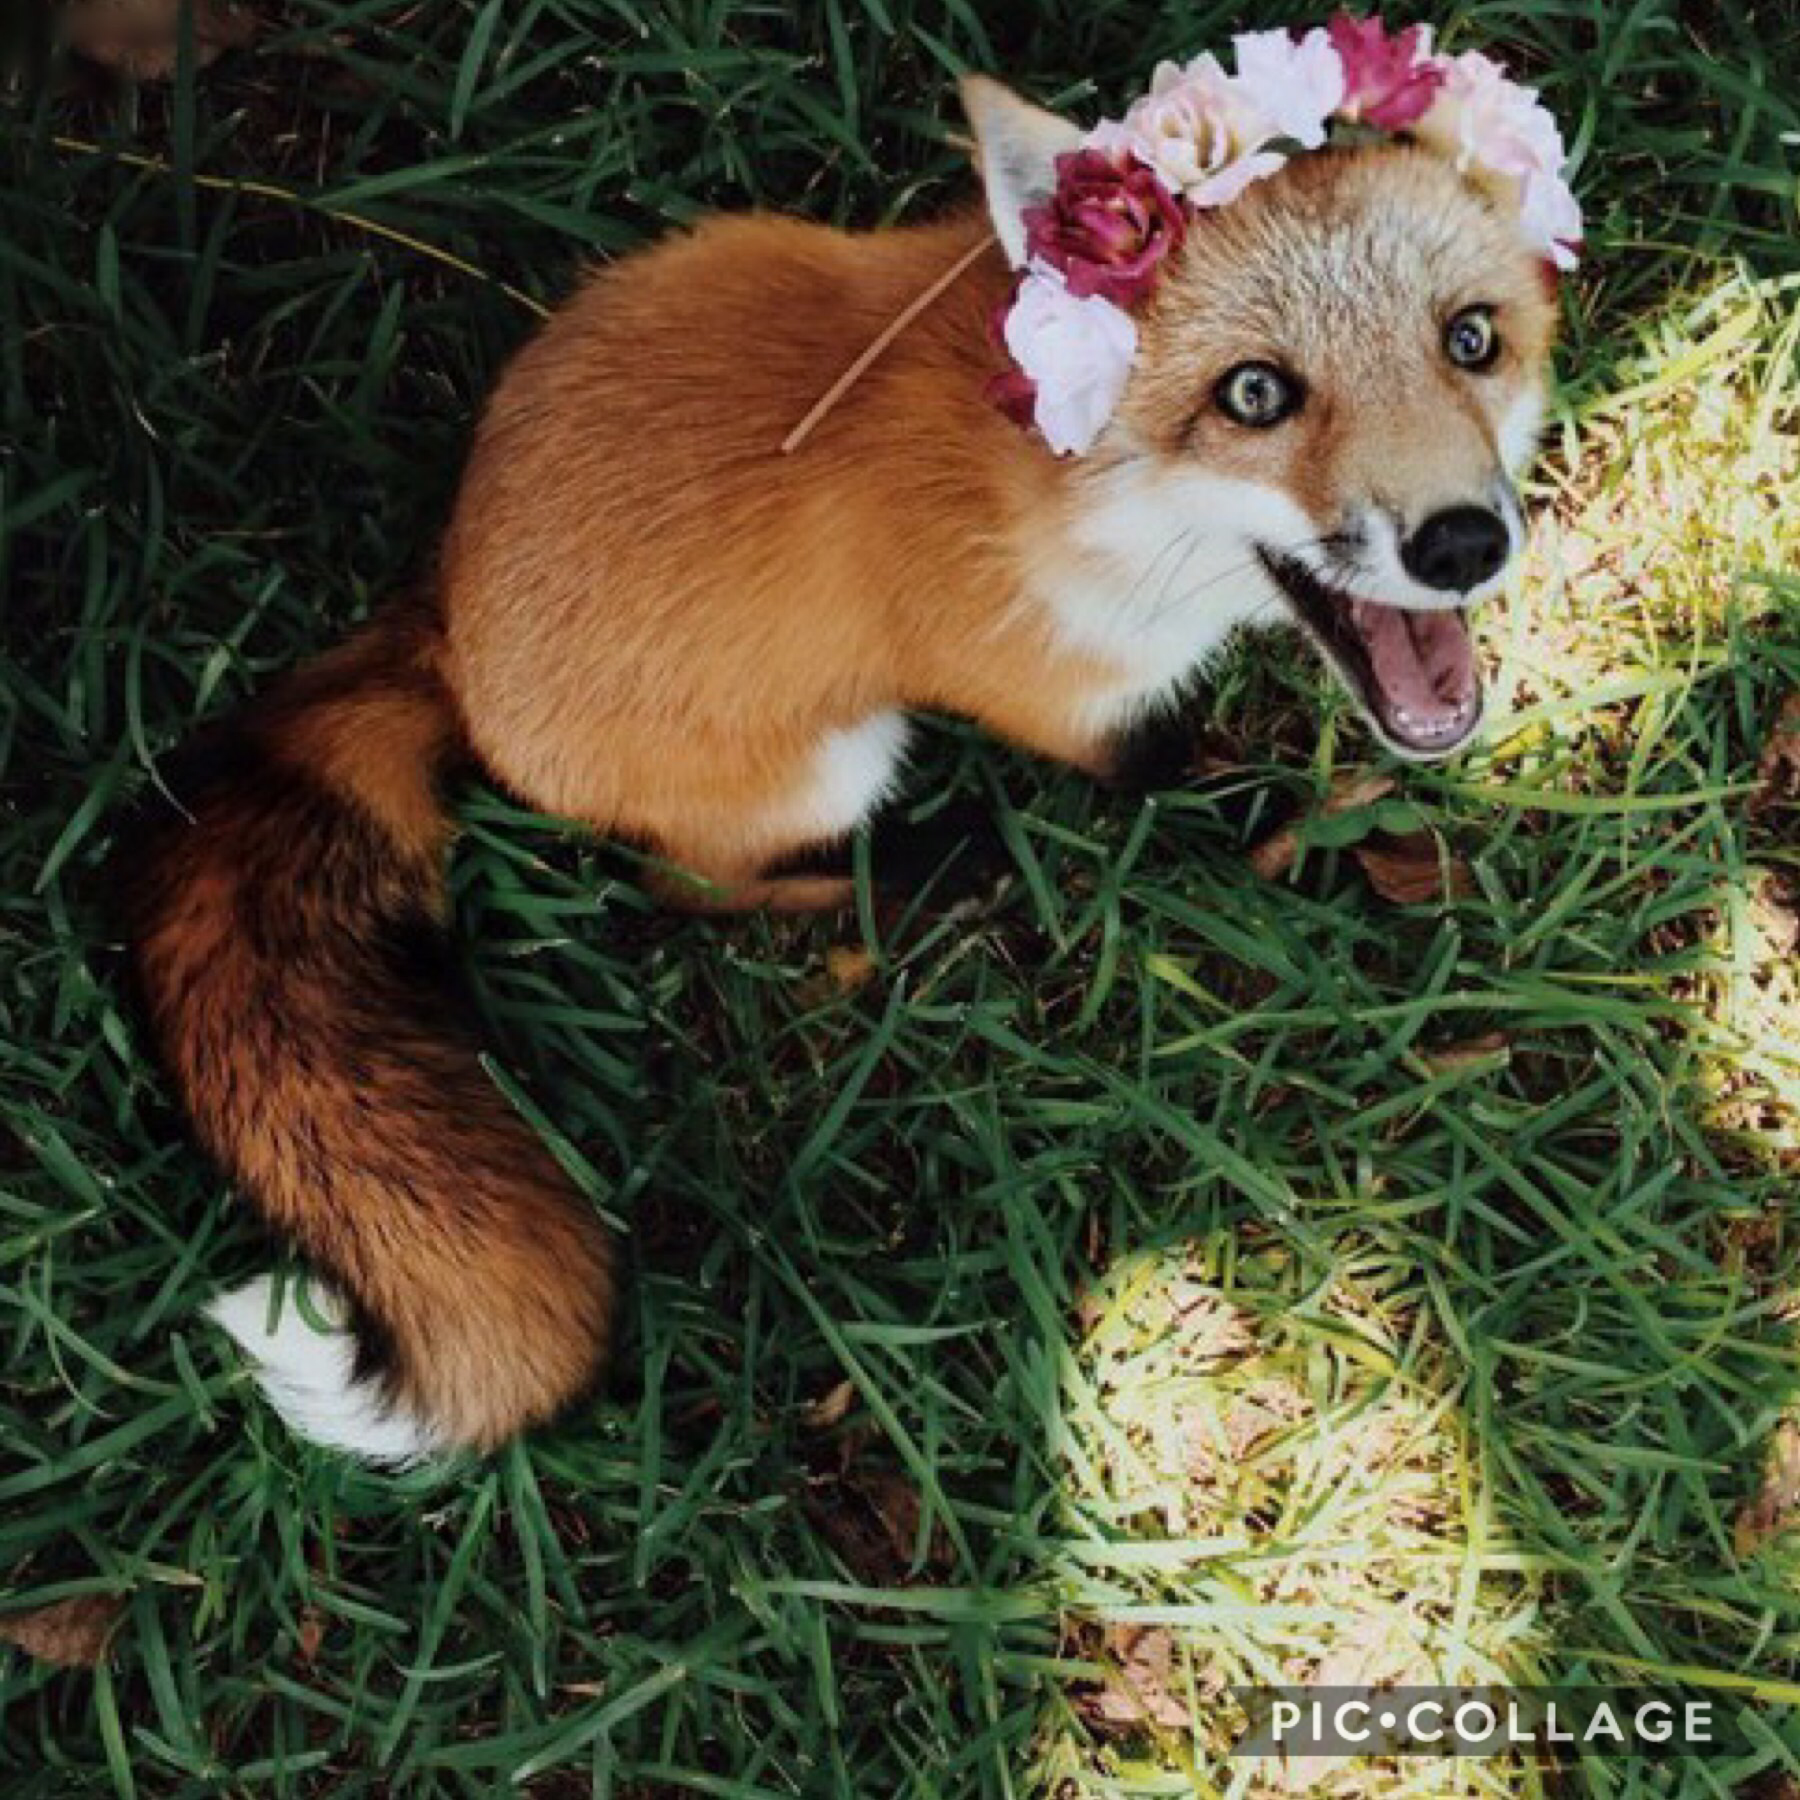 I want to learn how to make a flowercrown🤔
I’m rarely angry but on the off chance I am I’m like ranting and stuff and I occasionally argue with my sister so I’m afraid one day I’ll like let is slip that she’s one of the only reasons I haven’t done anythin